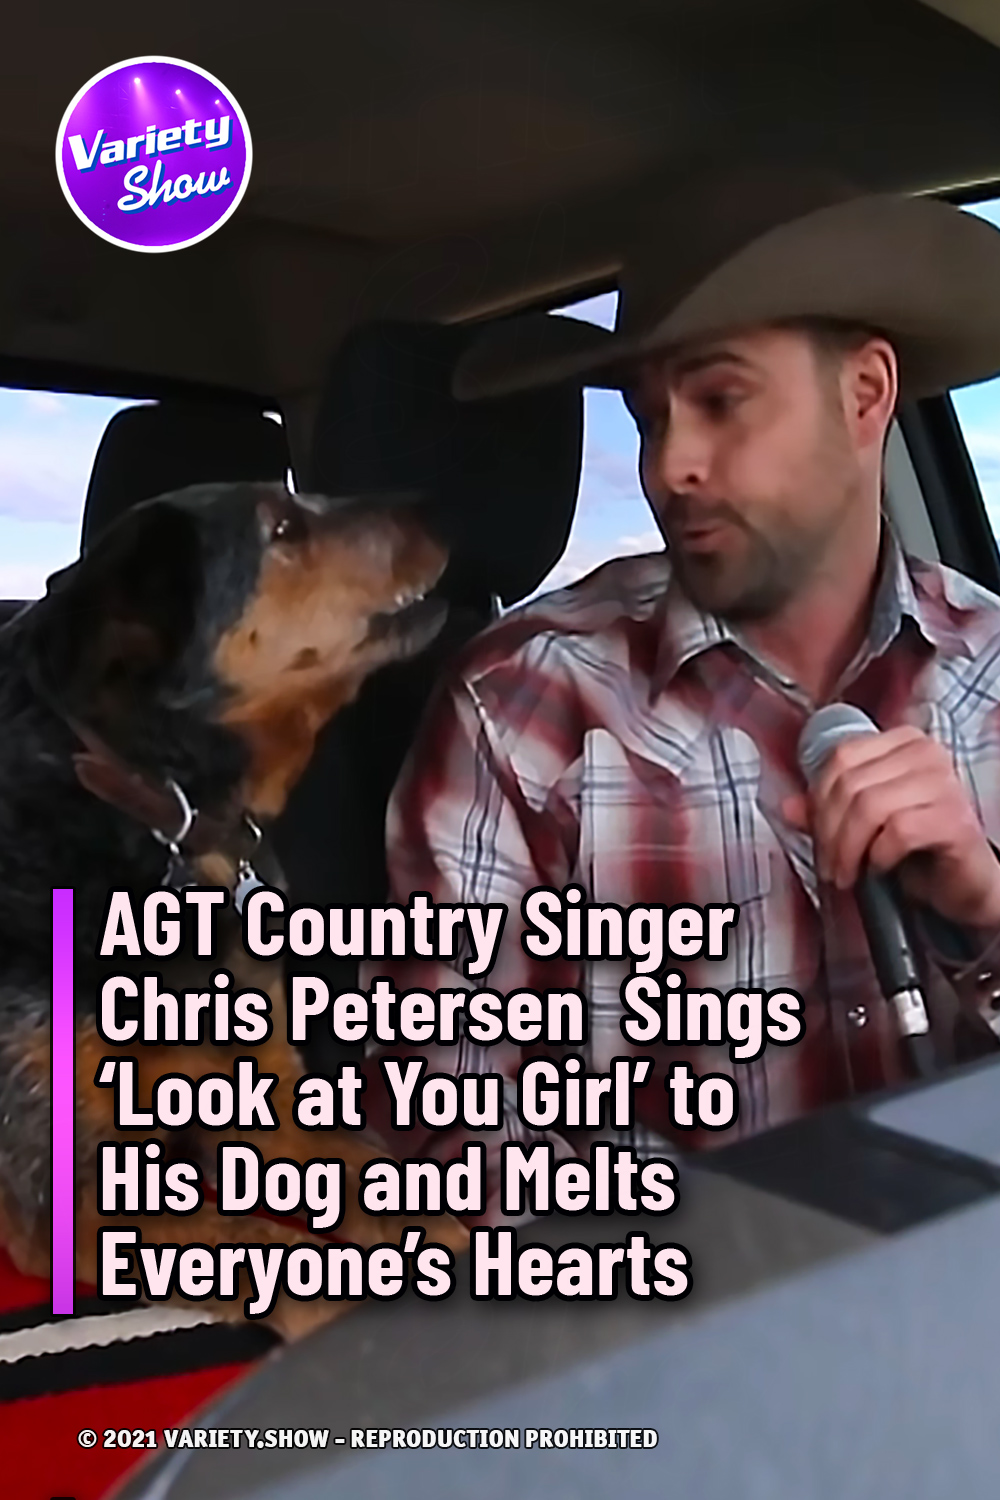 AGT Country Singer Chris Petersen  Sings ‘Look at You Girl’ to His Dog and Melts Everyone’s Hearts